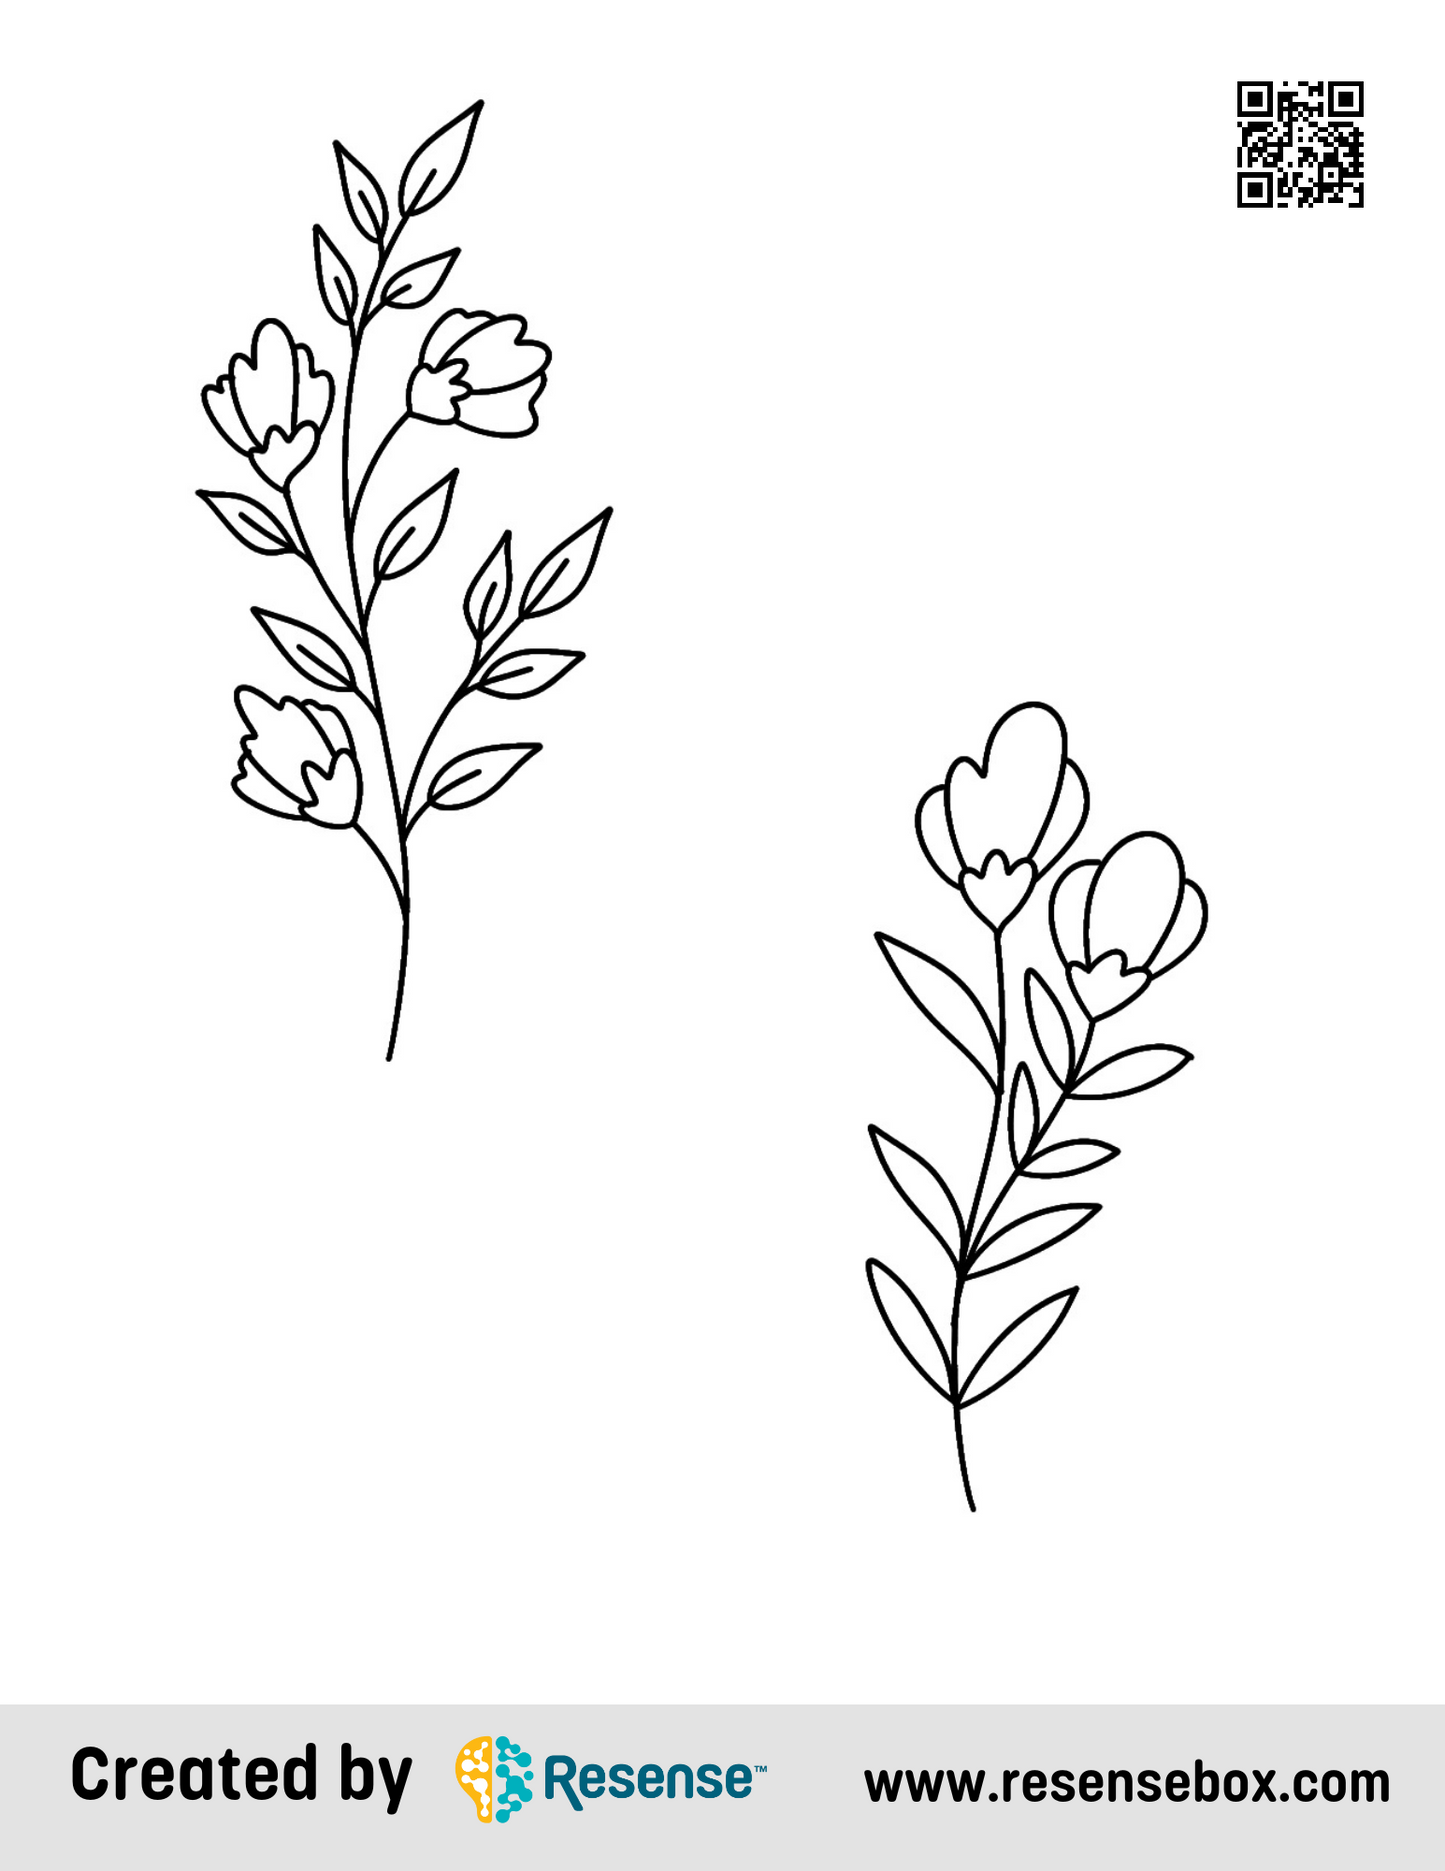 FREE Flower Dementia Friendly Coloring Pages (PDF DOWLOAD)